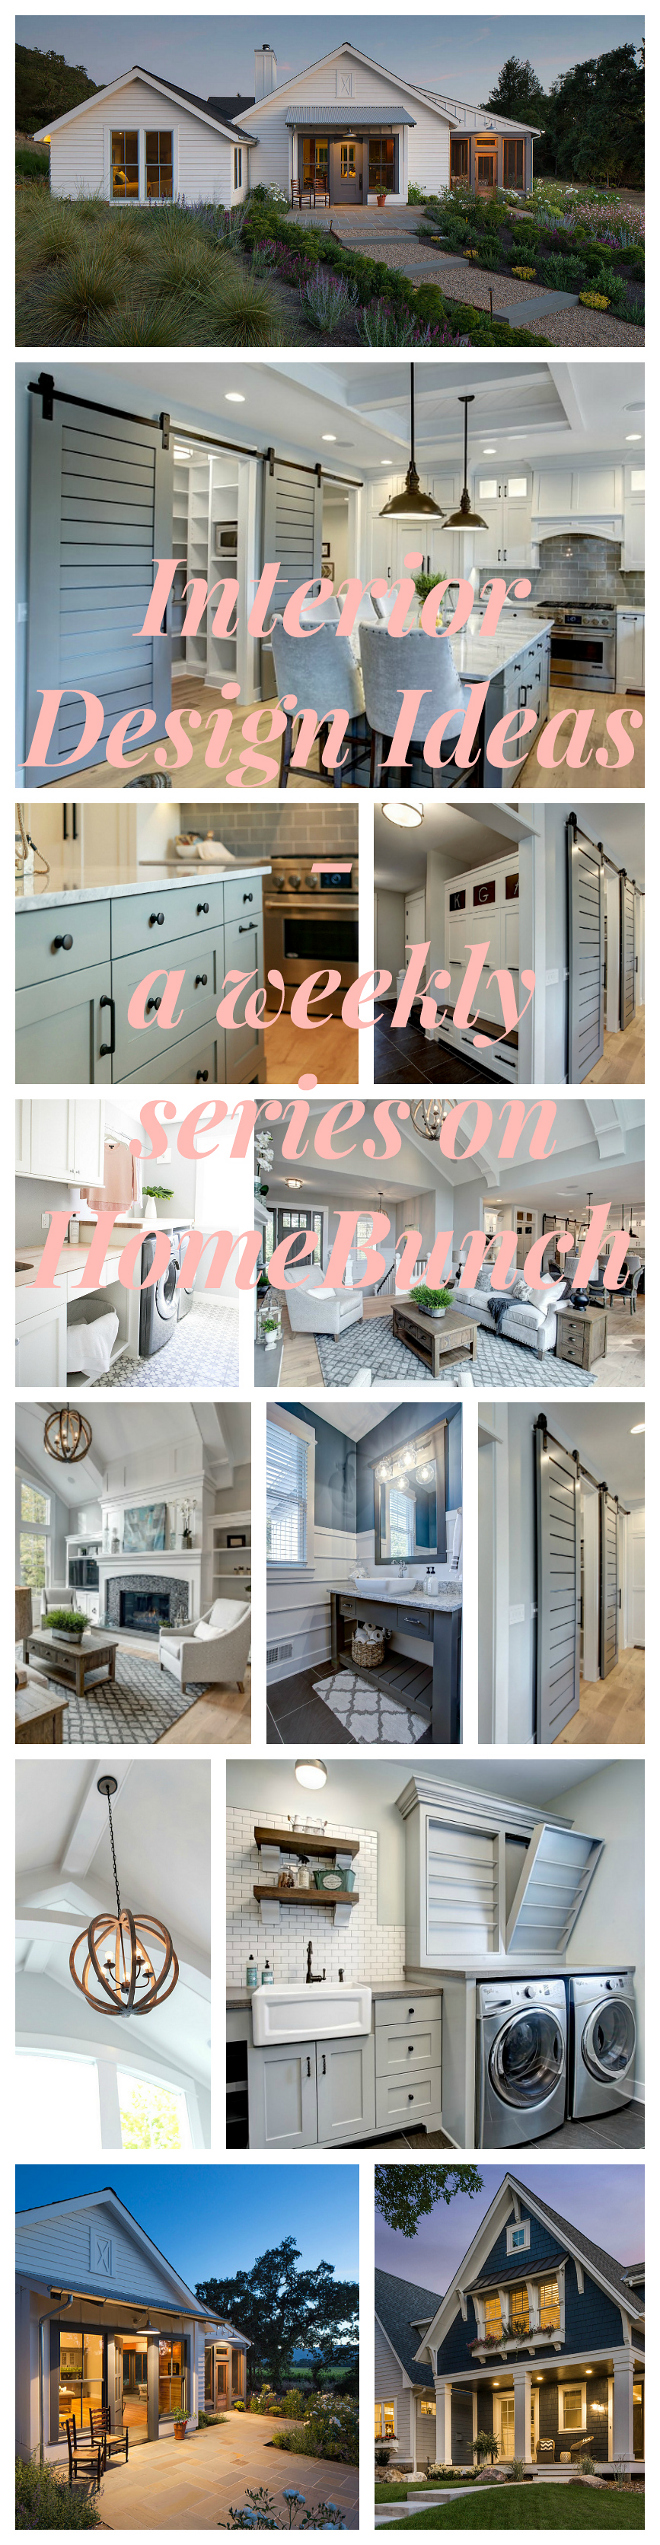 Interior Design Ideas - a weekly series on Home Bunch